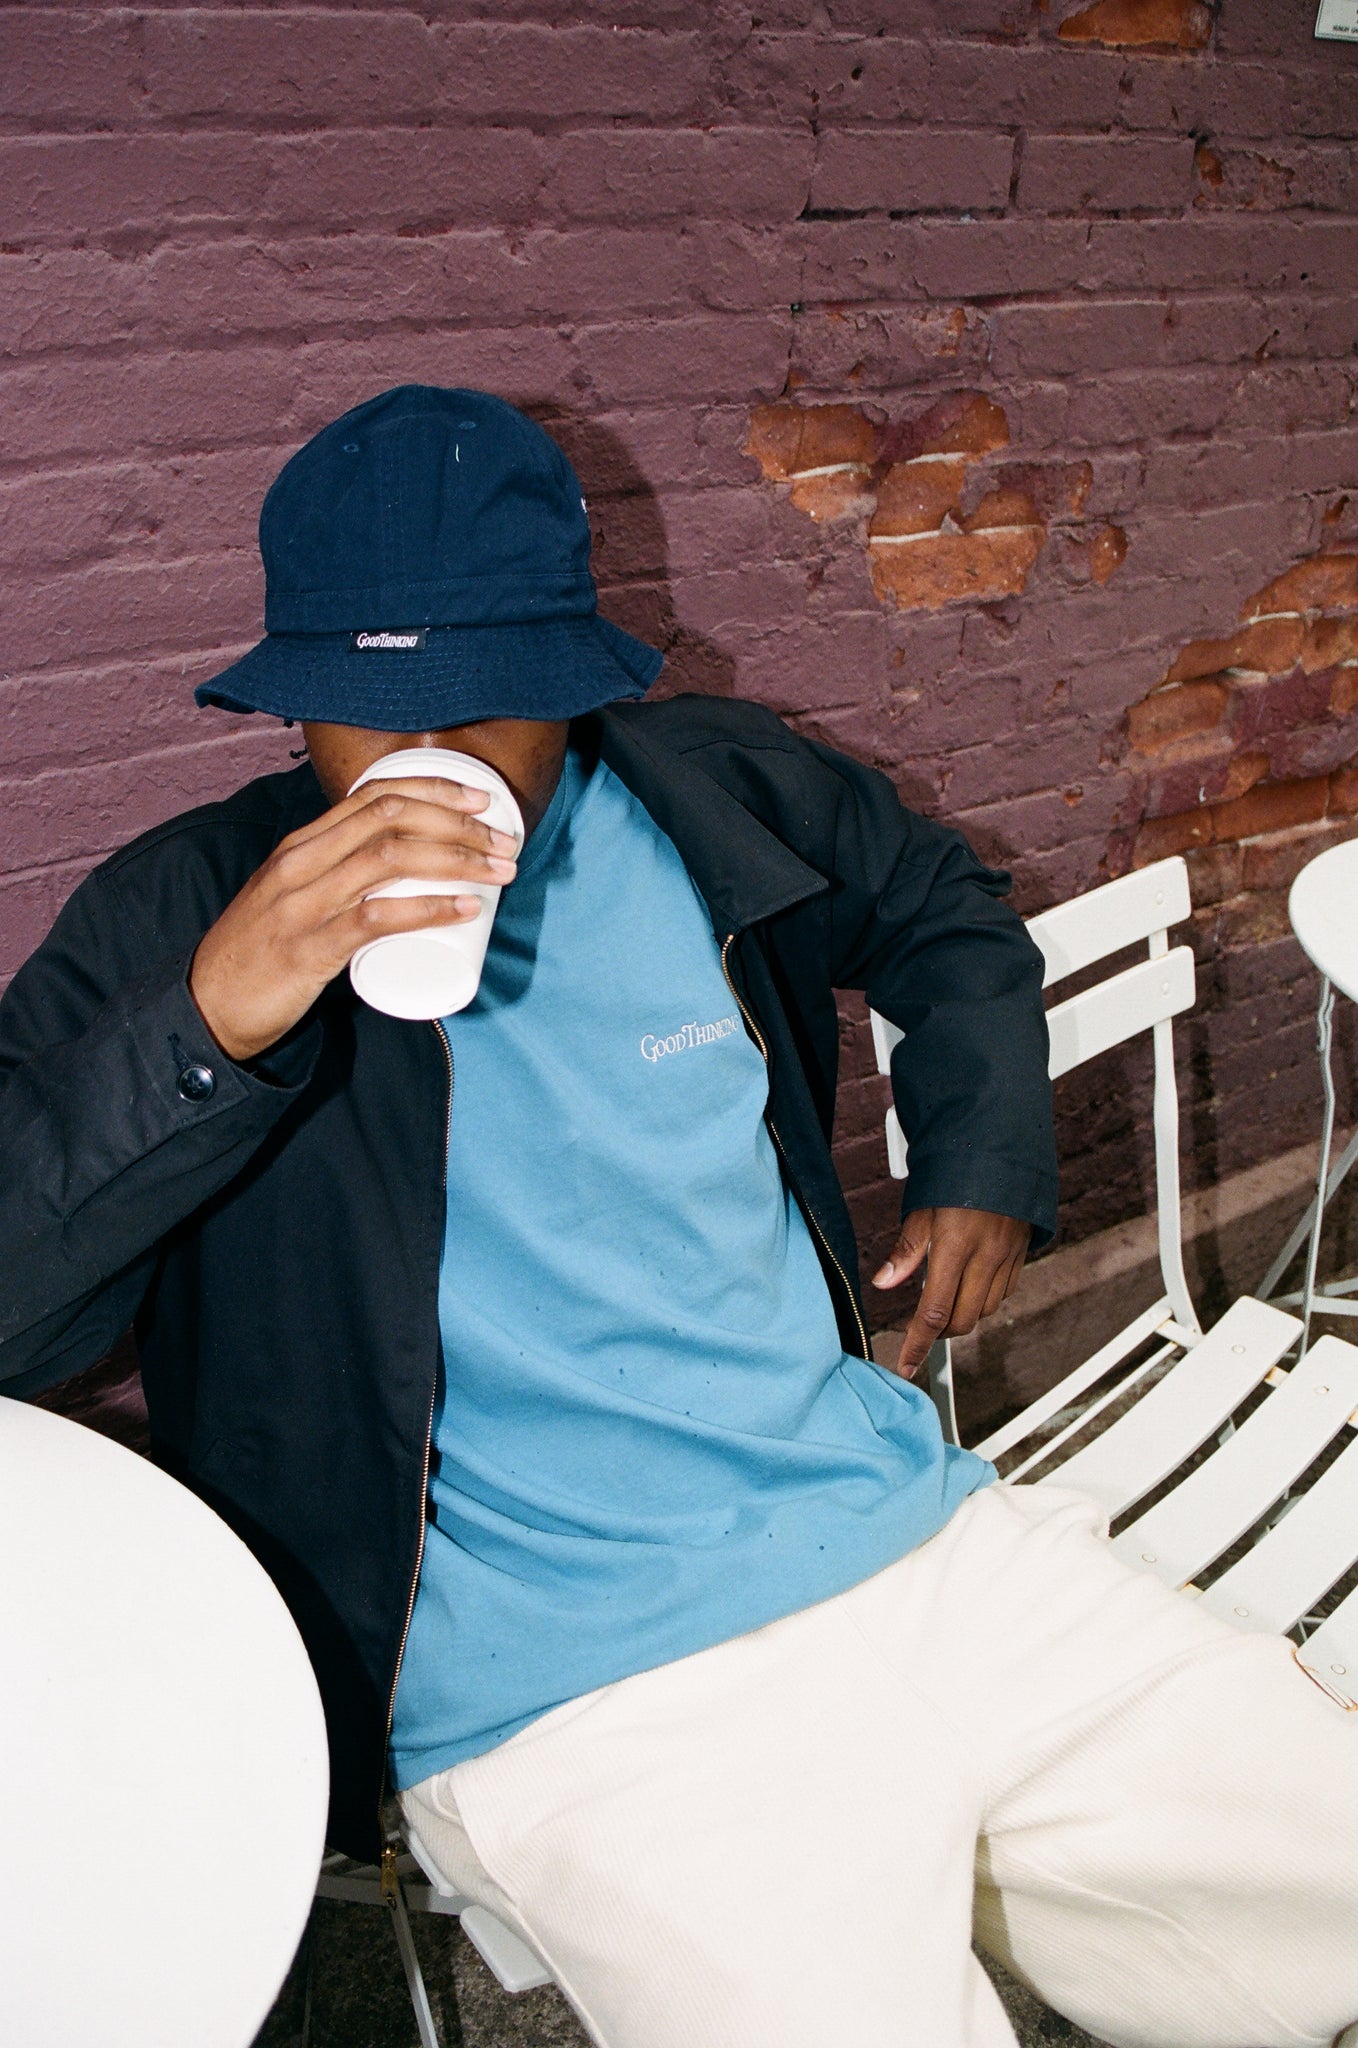 Embroidered Logo Tee (Blue Moon)